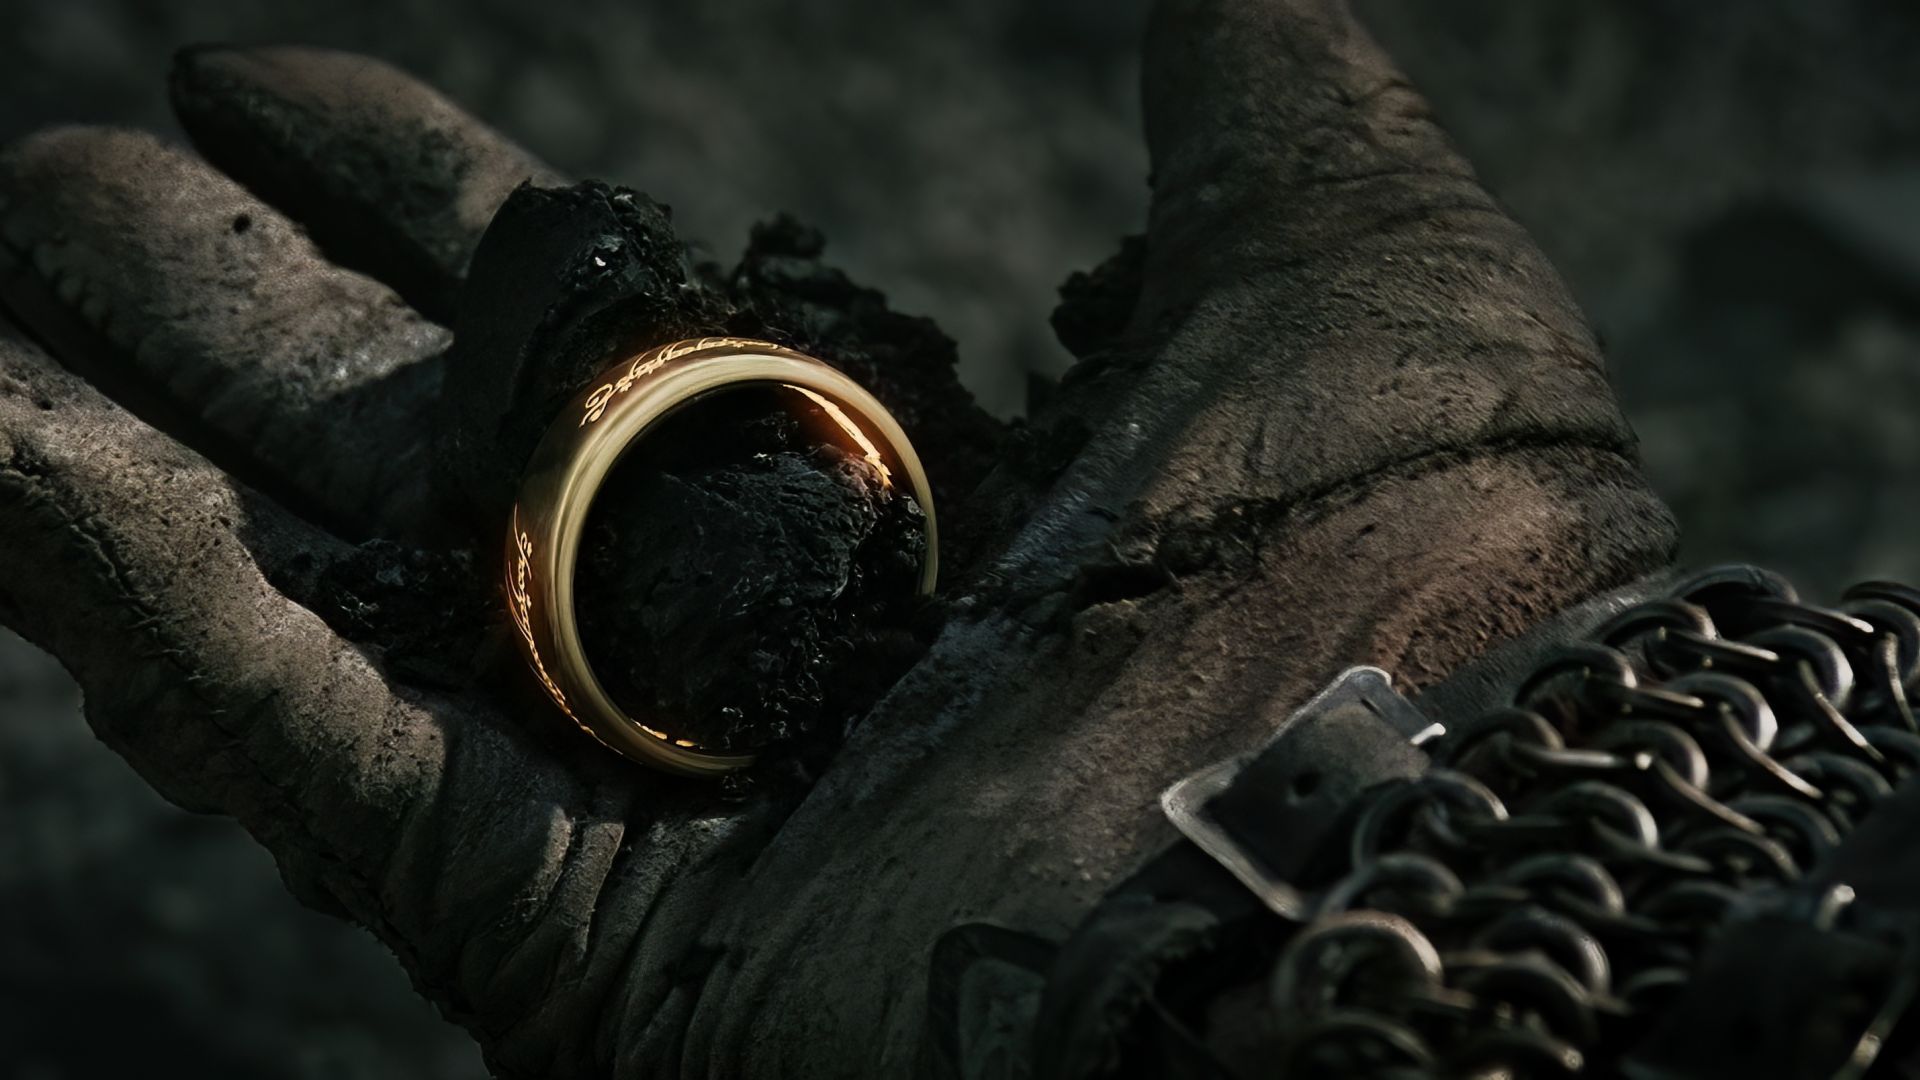 Desktop Wallpaper The Lord Of The Rings: The Rings Of Power, Golden Ring, HD Image, Picture, Background, 9c5377